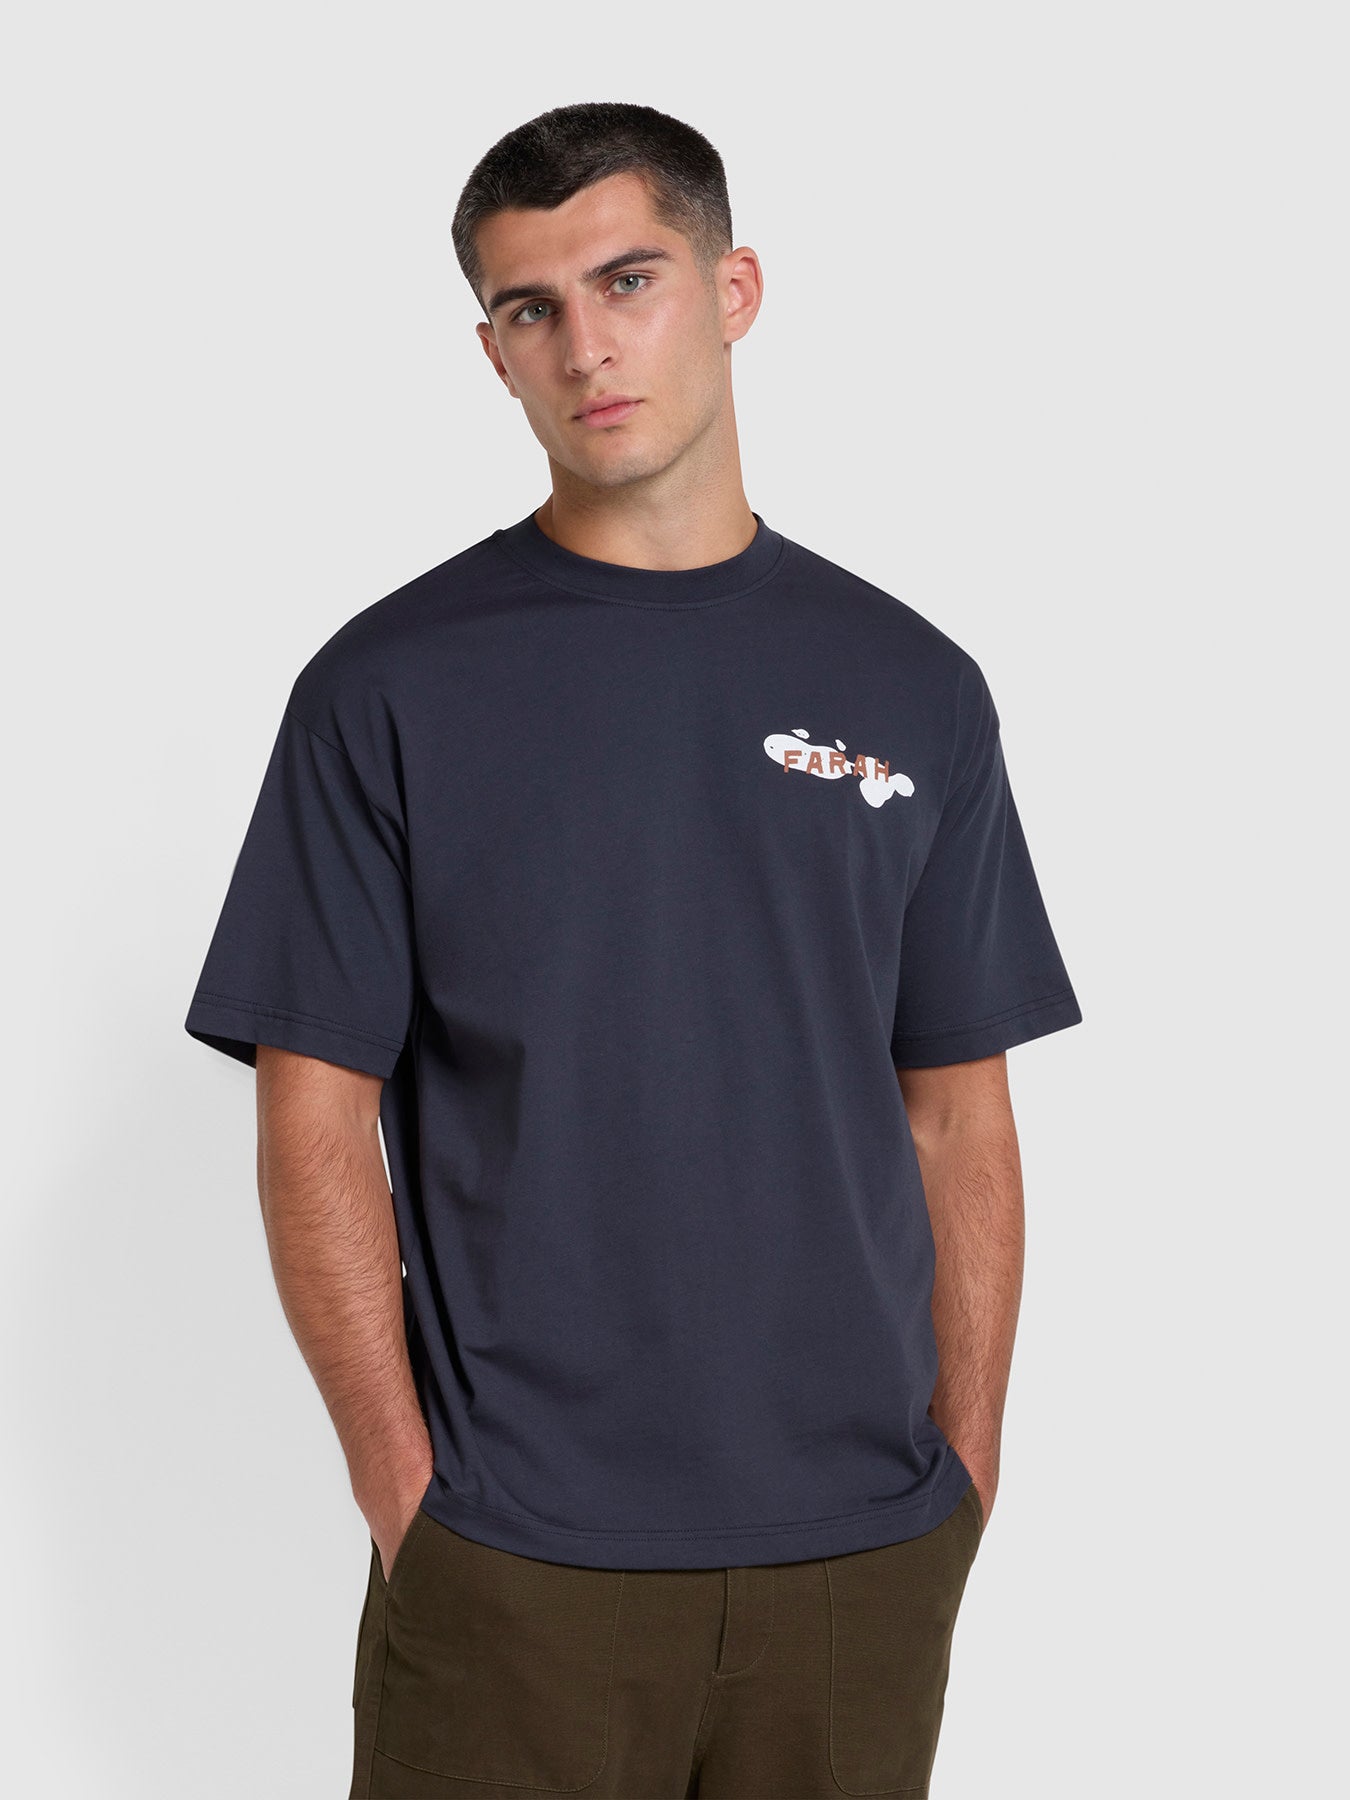 View Guy Graphic Relaxed Fit Organic Cotton TShirt In True Navy information